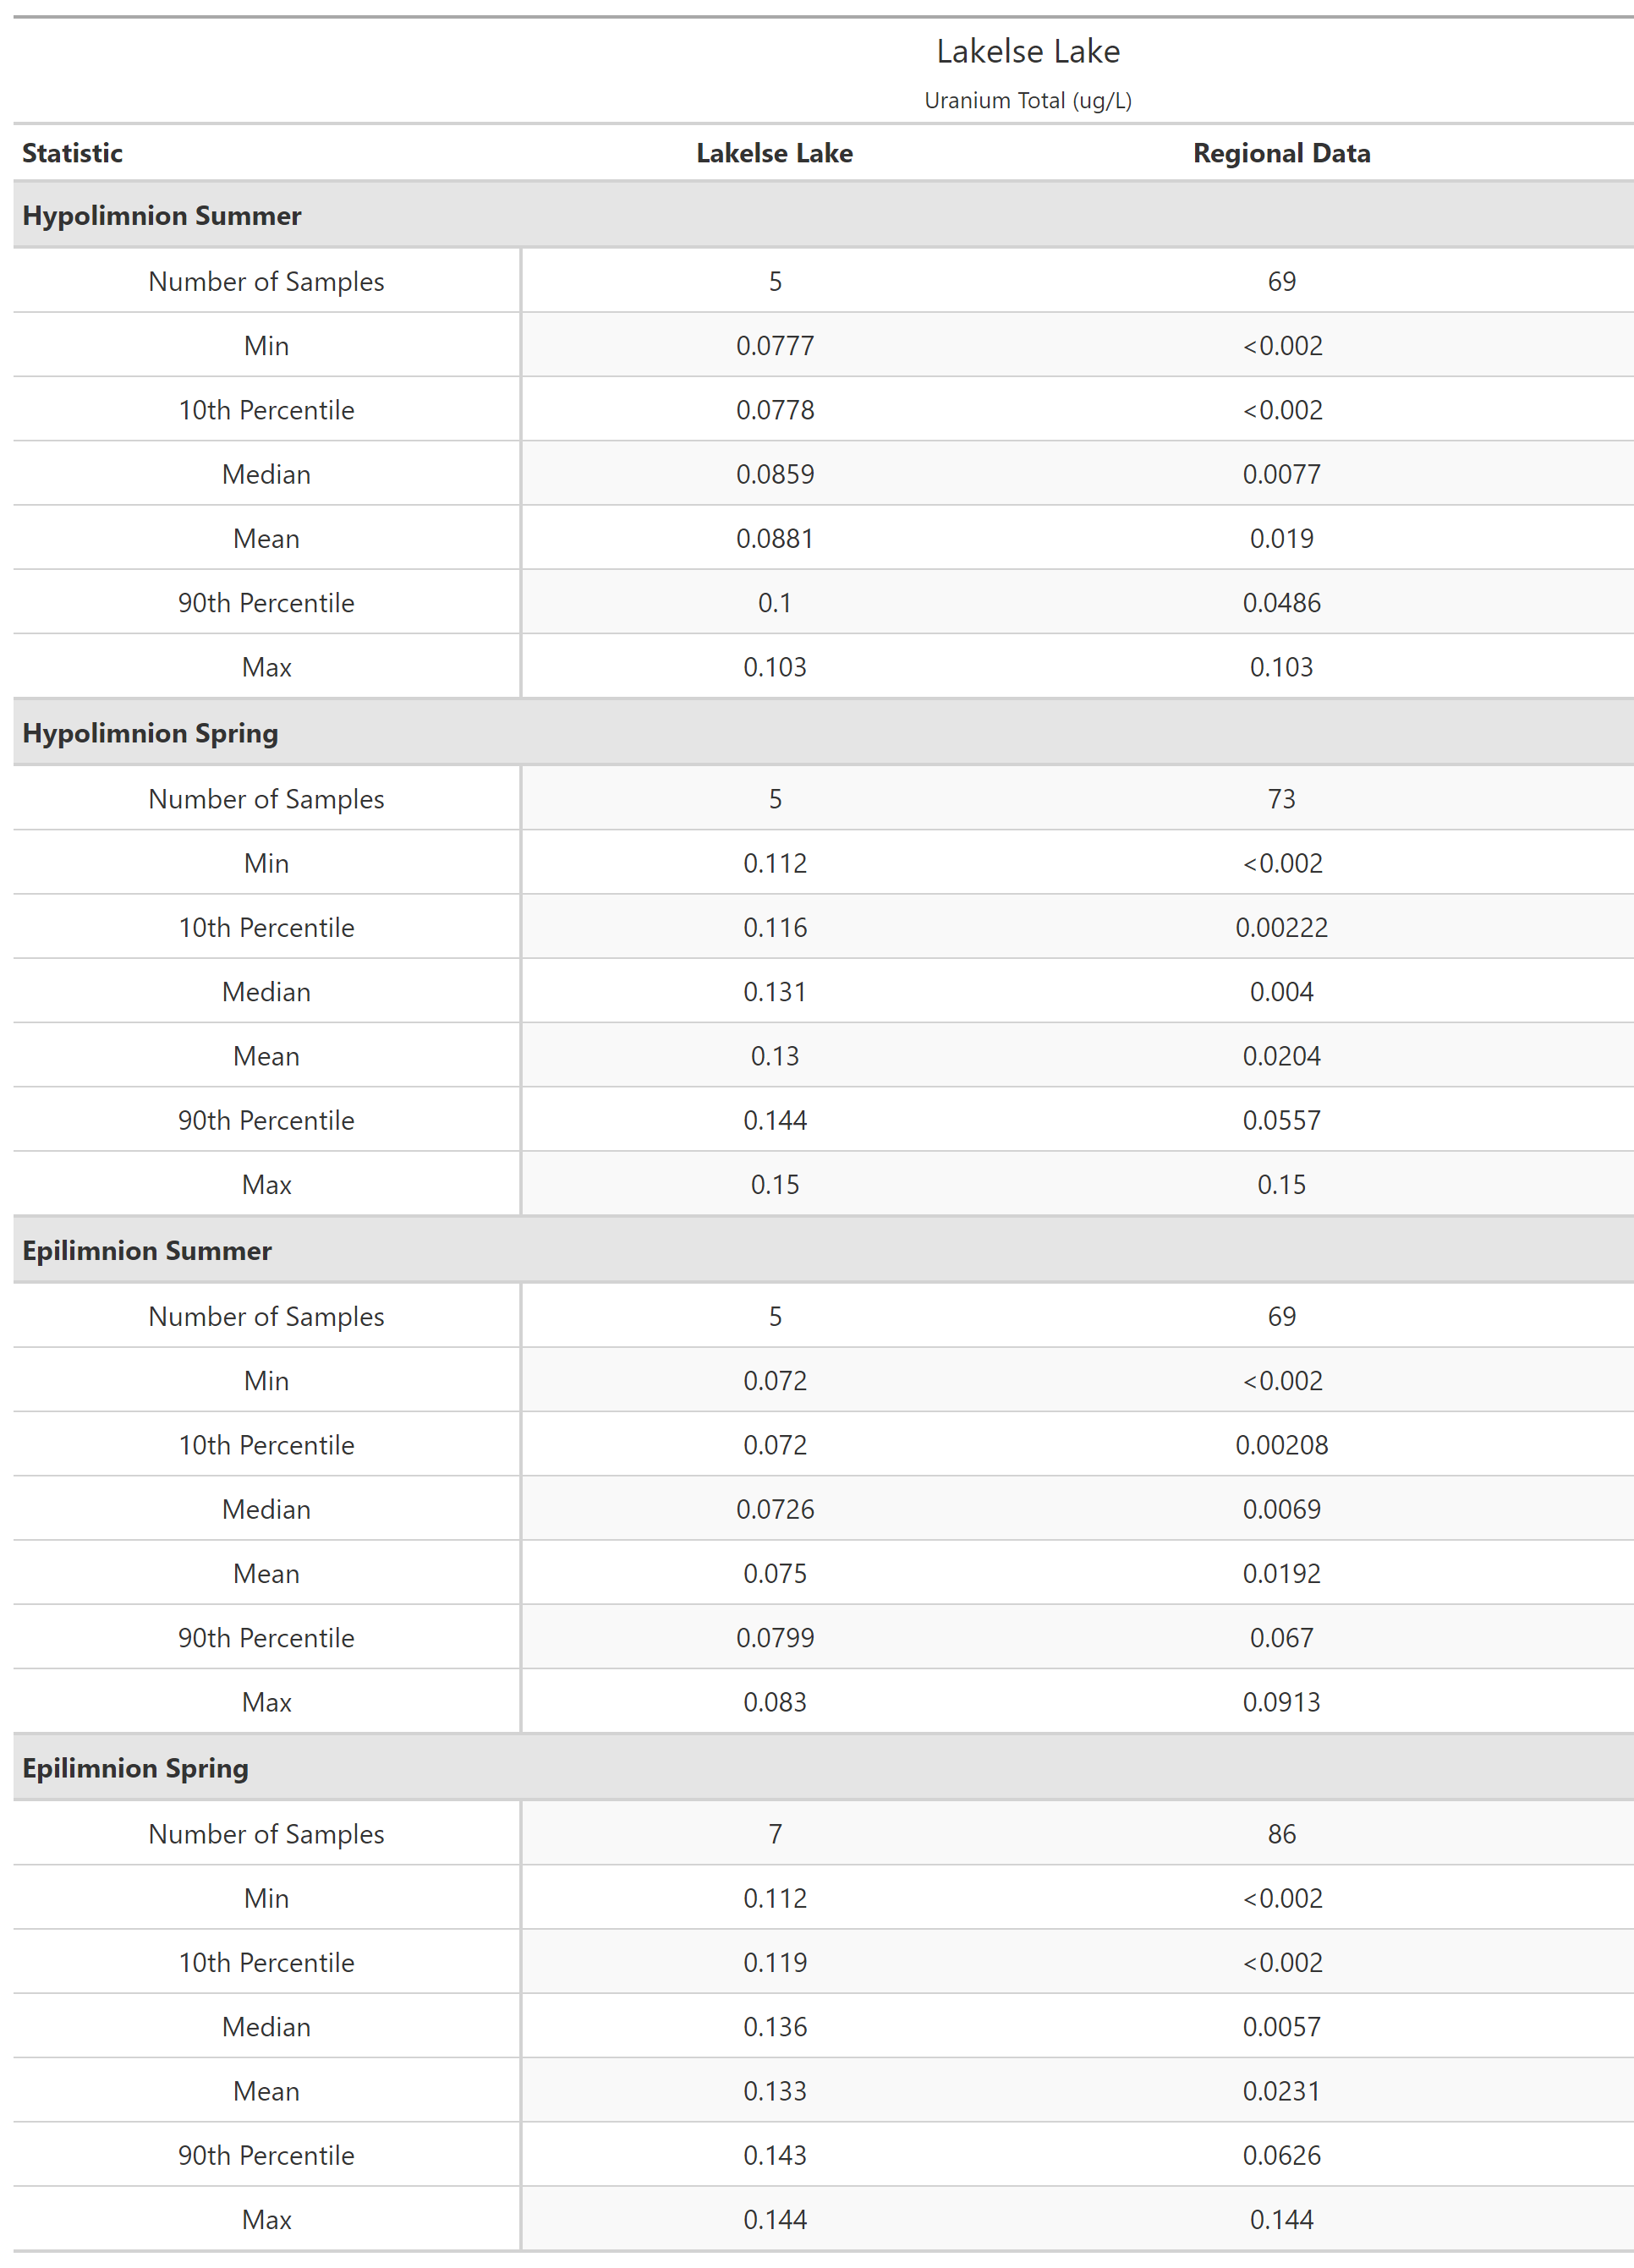 A table of summary statistics for Uranium Total with comparison to regional data